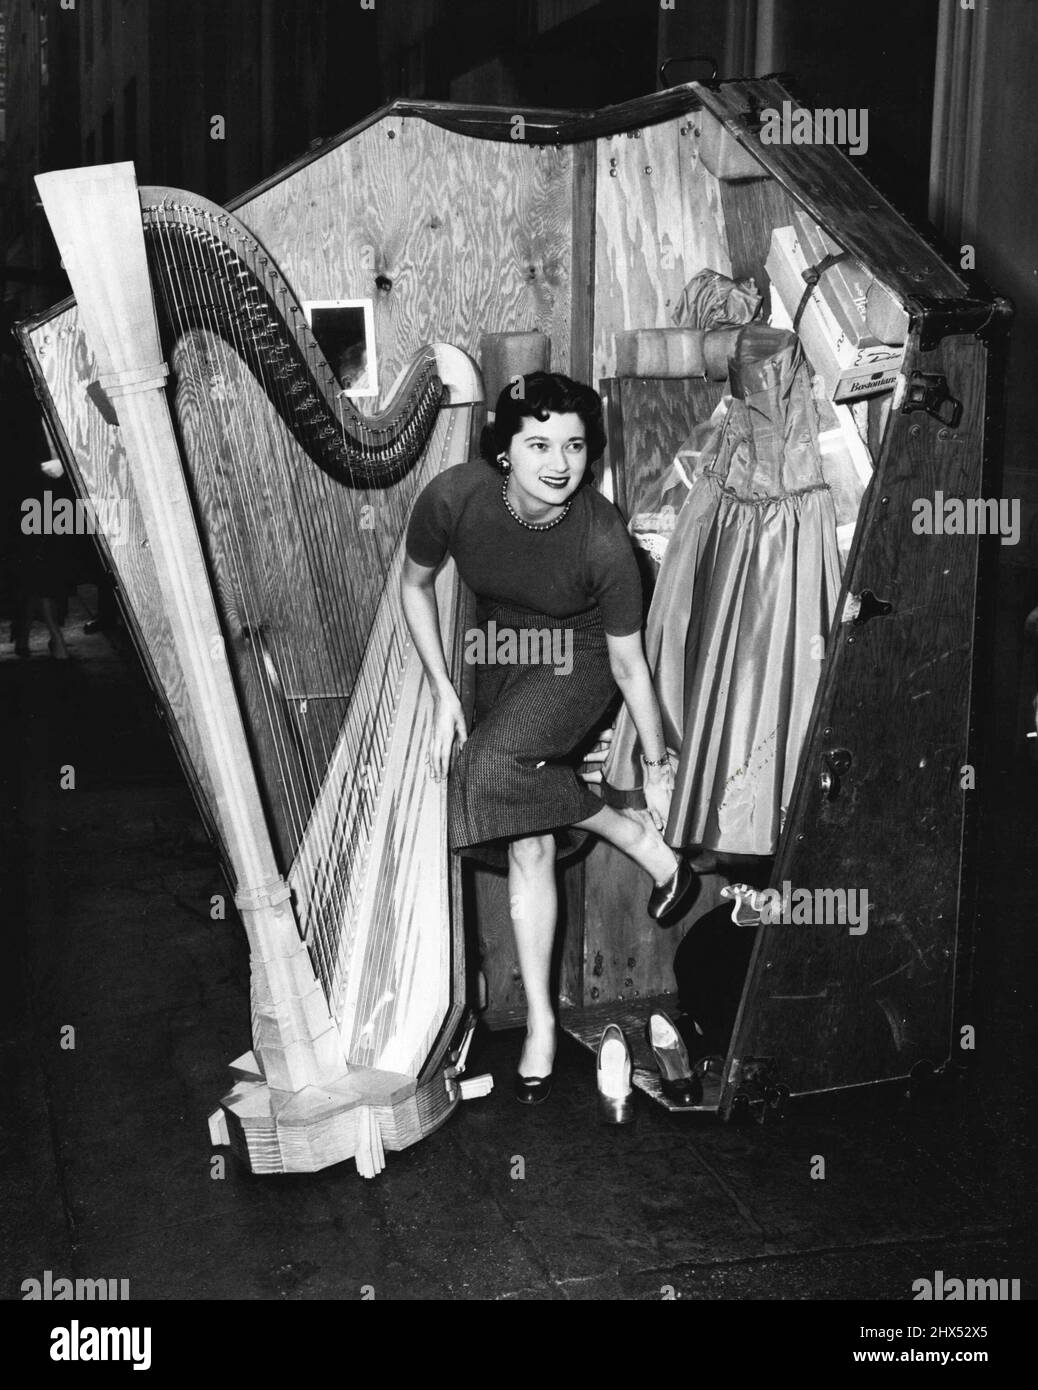 Carol Baum American Harpist. May 05, 1955. (Photo by The New York Times). Stock Photo